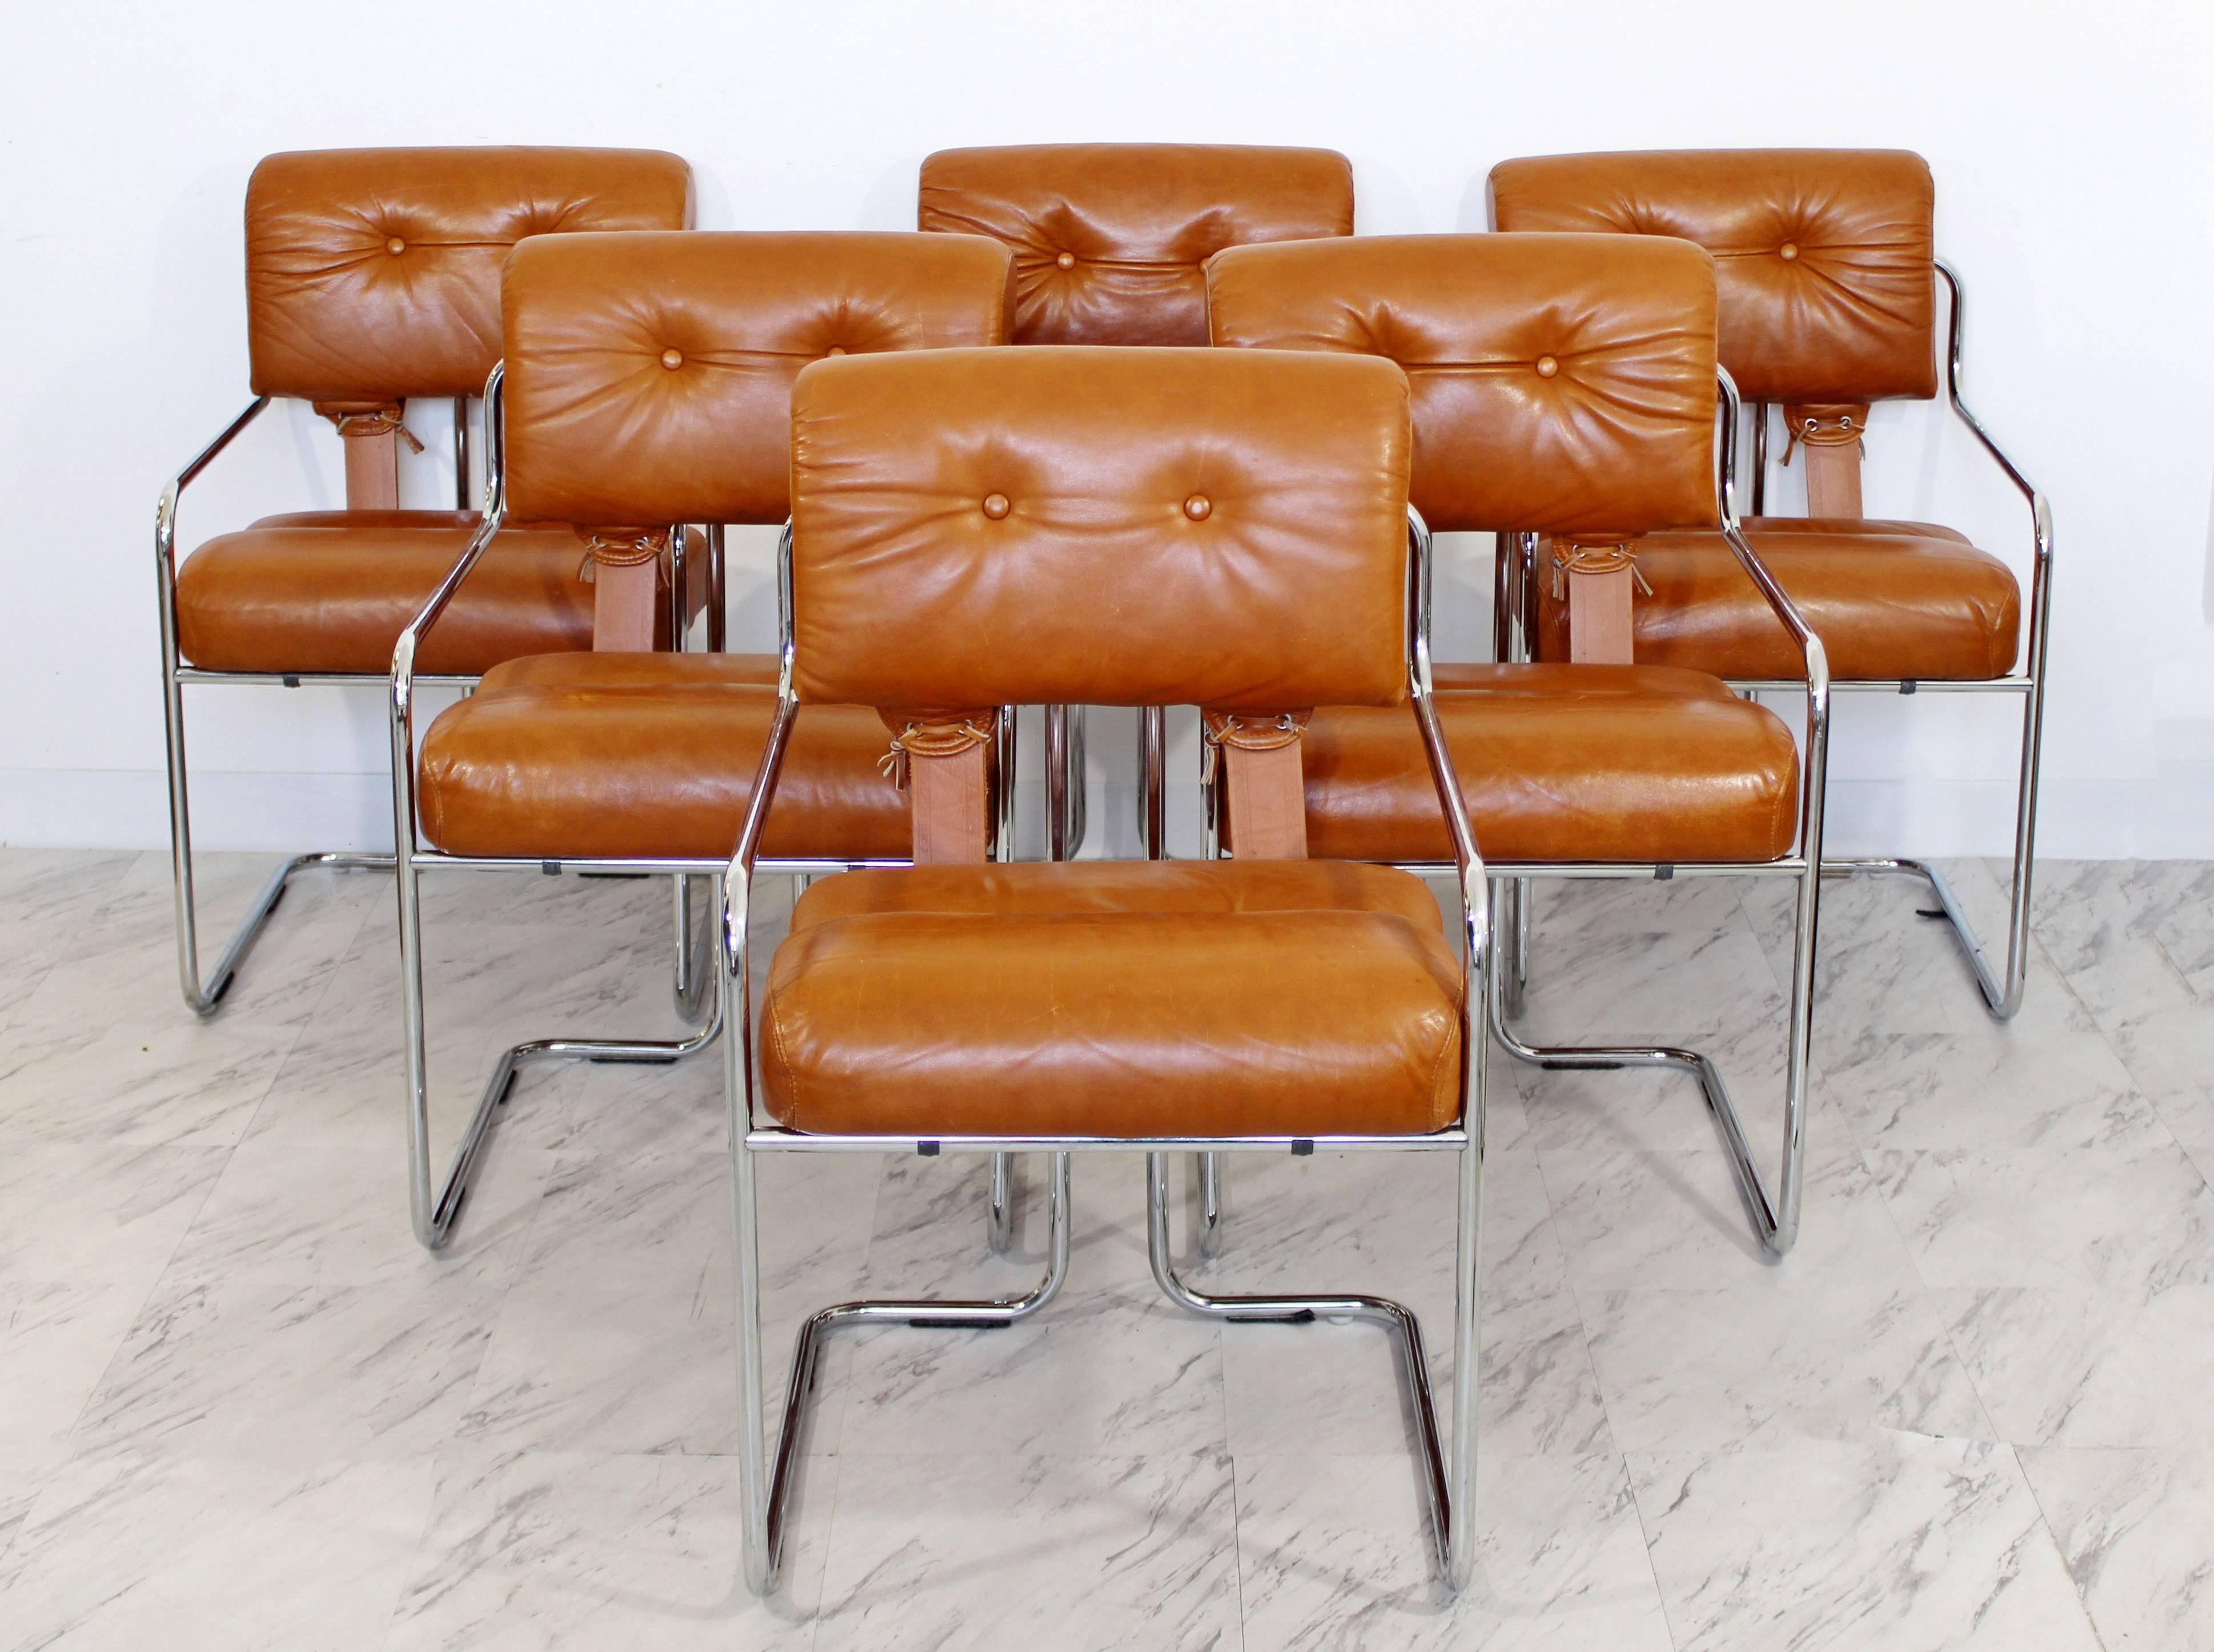 For your consideration is a full set of six, original, chrome and brown leather, dining armchairs by Mariani, circa 1970s, Italian. In excellent condition. The dimensions are 20.5" W x 23" D x 33" B.H. x 18" S.H.